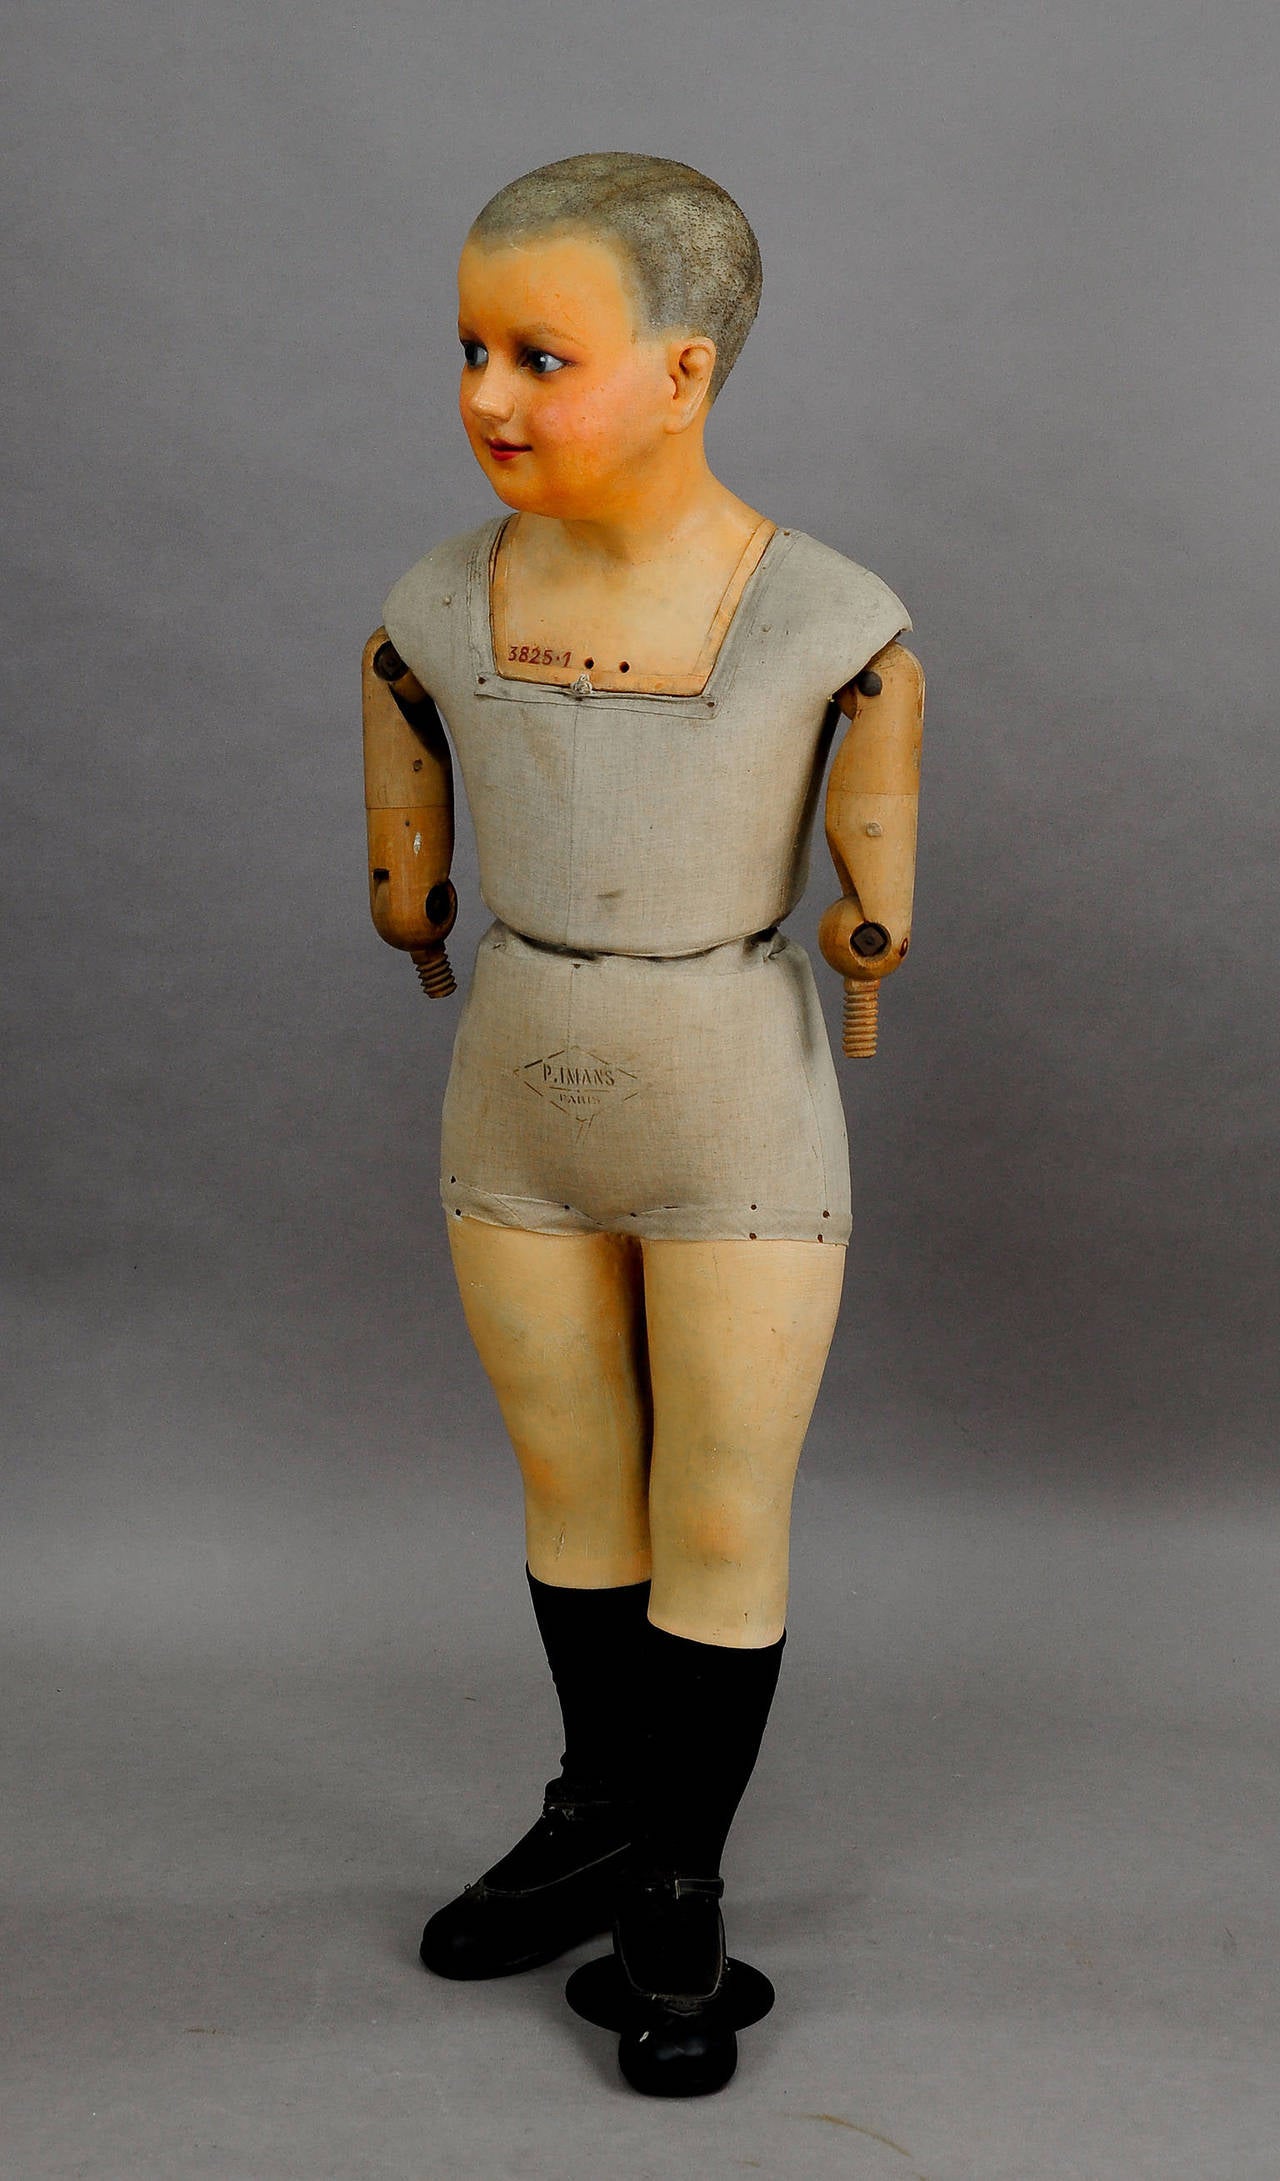 An antique child mannequin by Pierre Imans, Paris. With wax head and glass eyes. Body made of wood, covered with fabric. The arms are made of wood, legs made of plaster. Back and body marked. Executed, circa 1920.